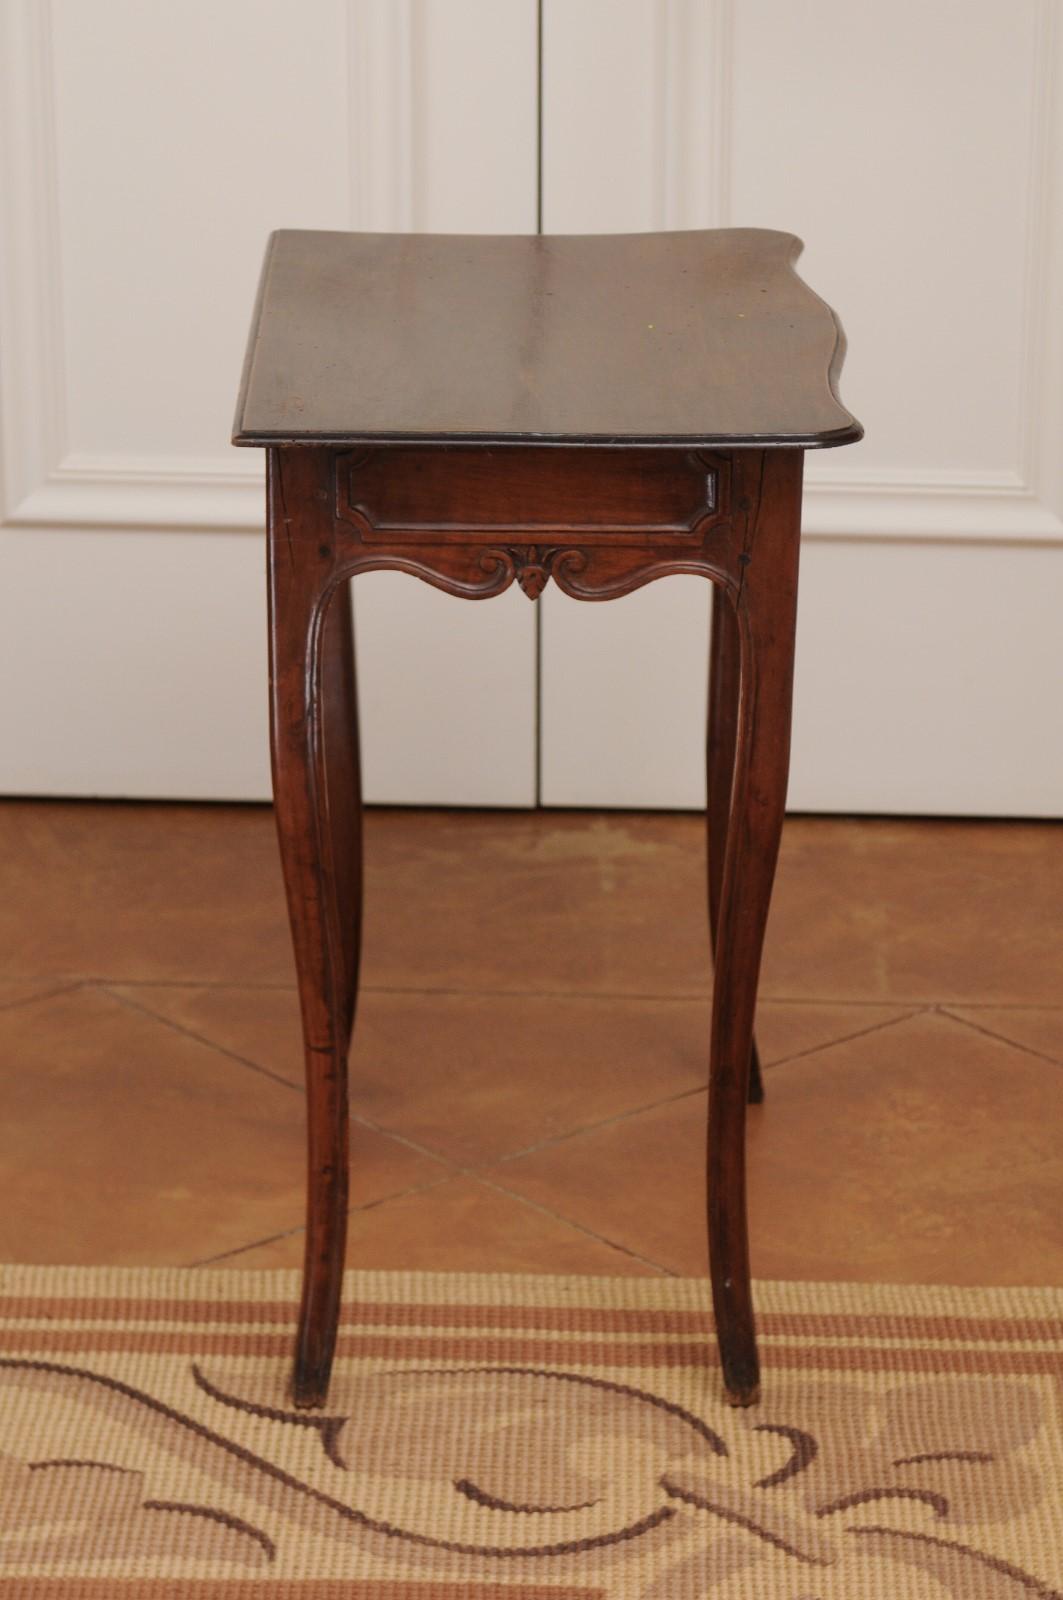 French 1790s Walnut Side Table with Side Drawer, Curving Legs and Carved Apron For Sale 2